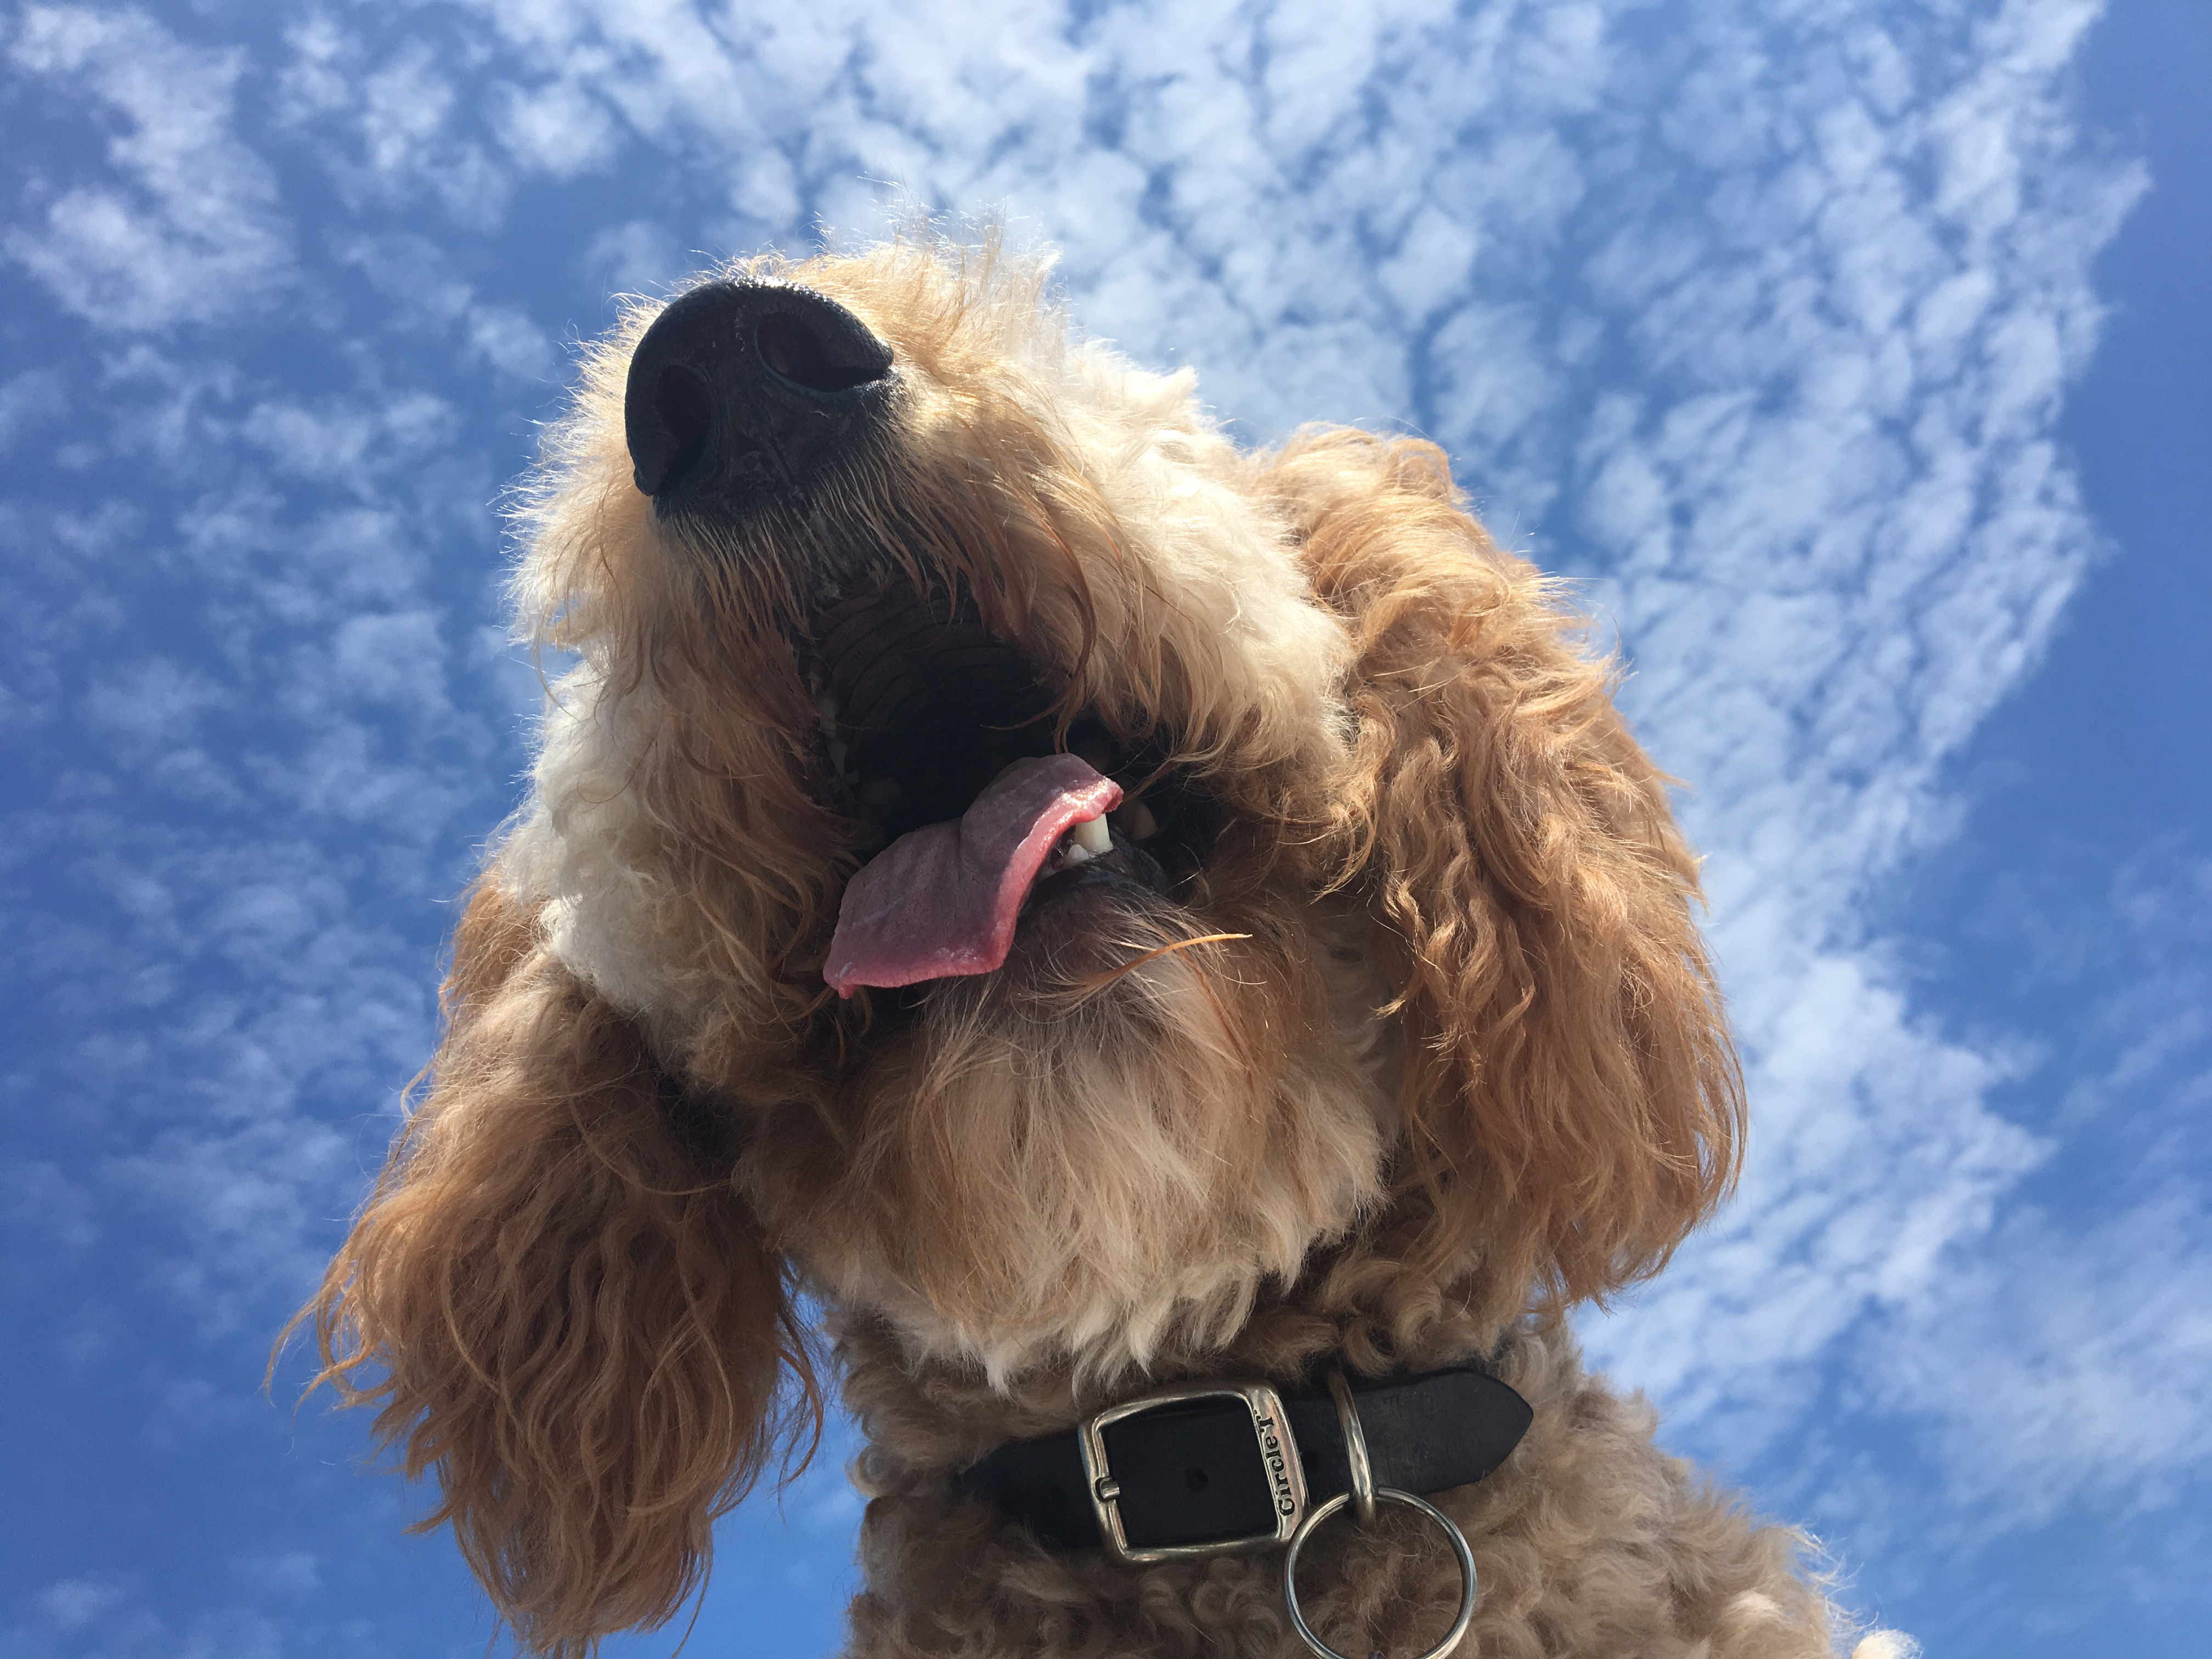 Baxter with his head in the clouds